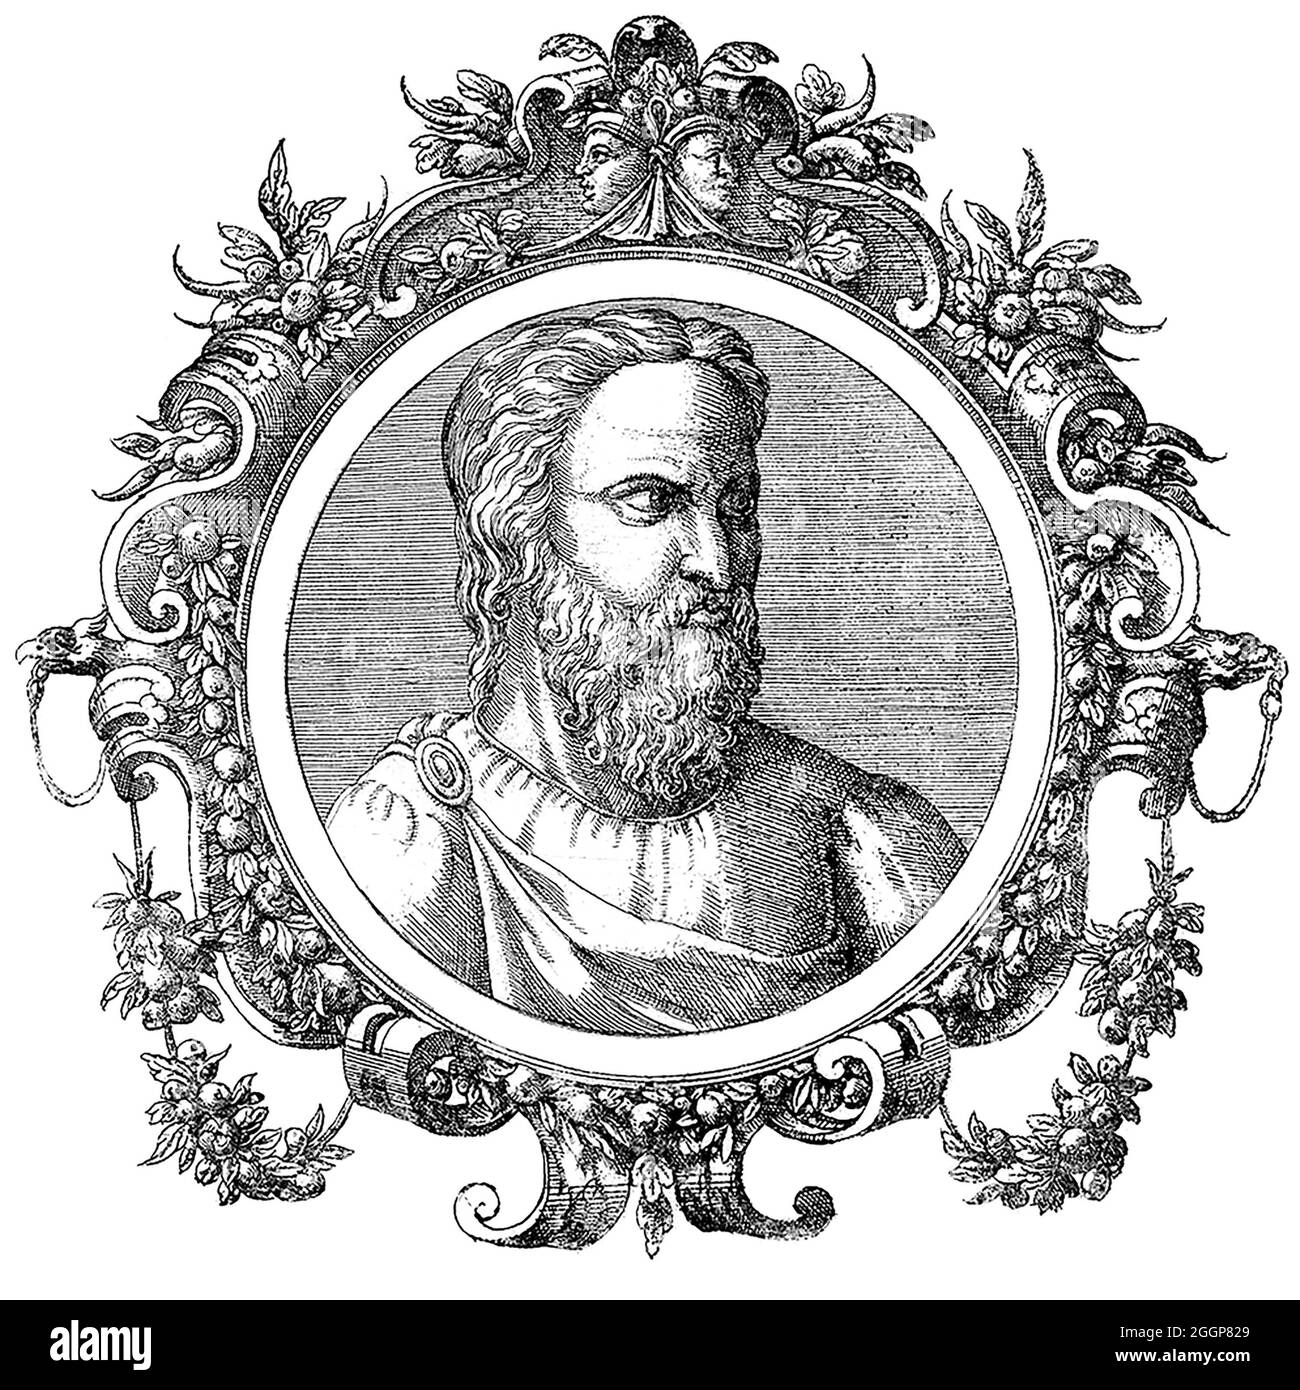 Aretaeus was a celebrated Greek physician who probably lived in Cappadocia in the second half of the second century AD, part of the Roman Empire. Stock Photo